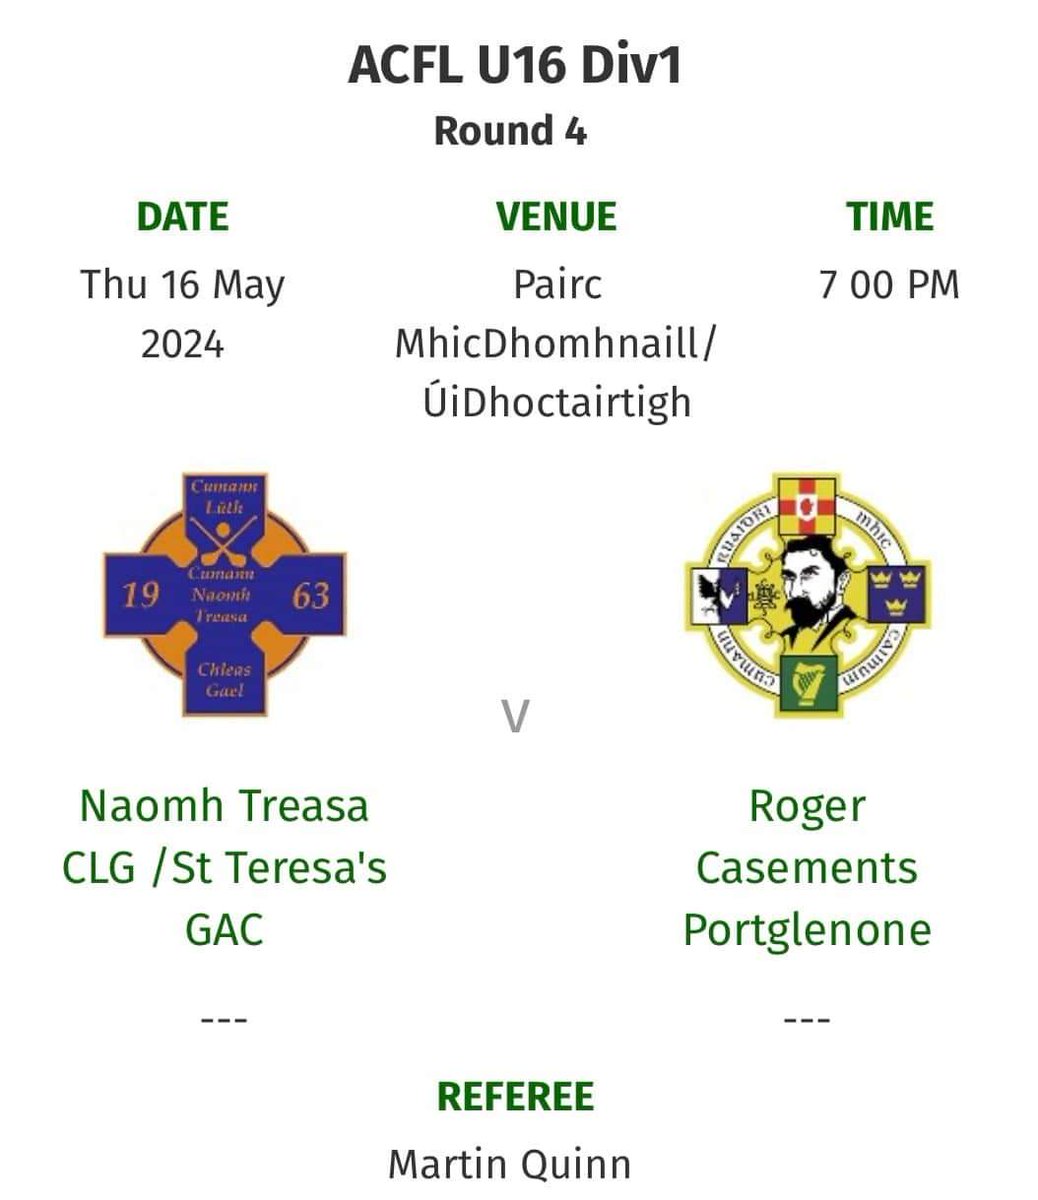 Two football fixtures at home tonight . Our U14 girls play @aldergrovegaa on the back pitch at 6.30pm while our U16 boys host @casementsgac on the front pitch at 7pm. Whilst our South Antrim team are away to @NaomhEannaCLG at 7.45pm All support welcome.